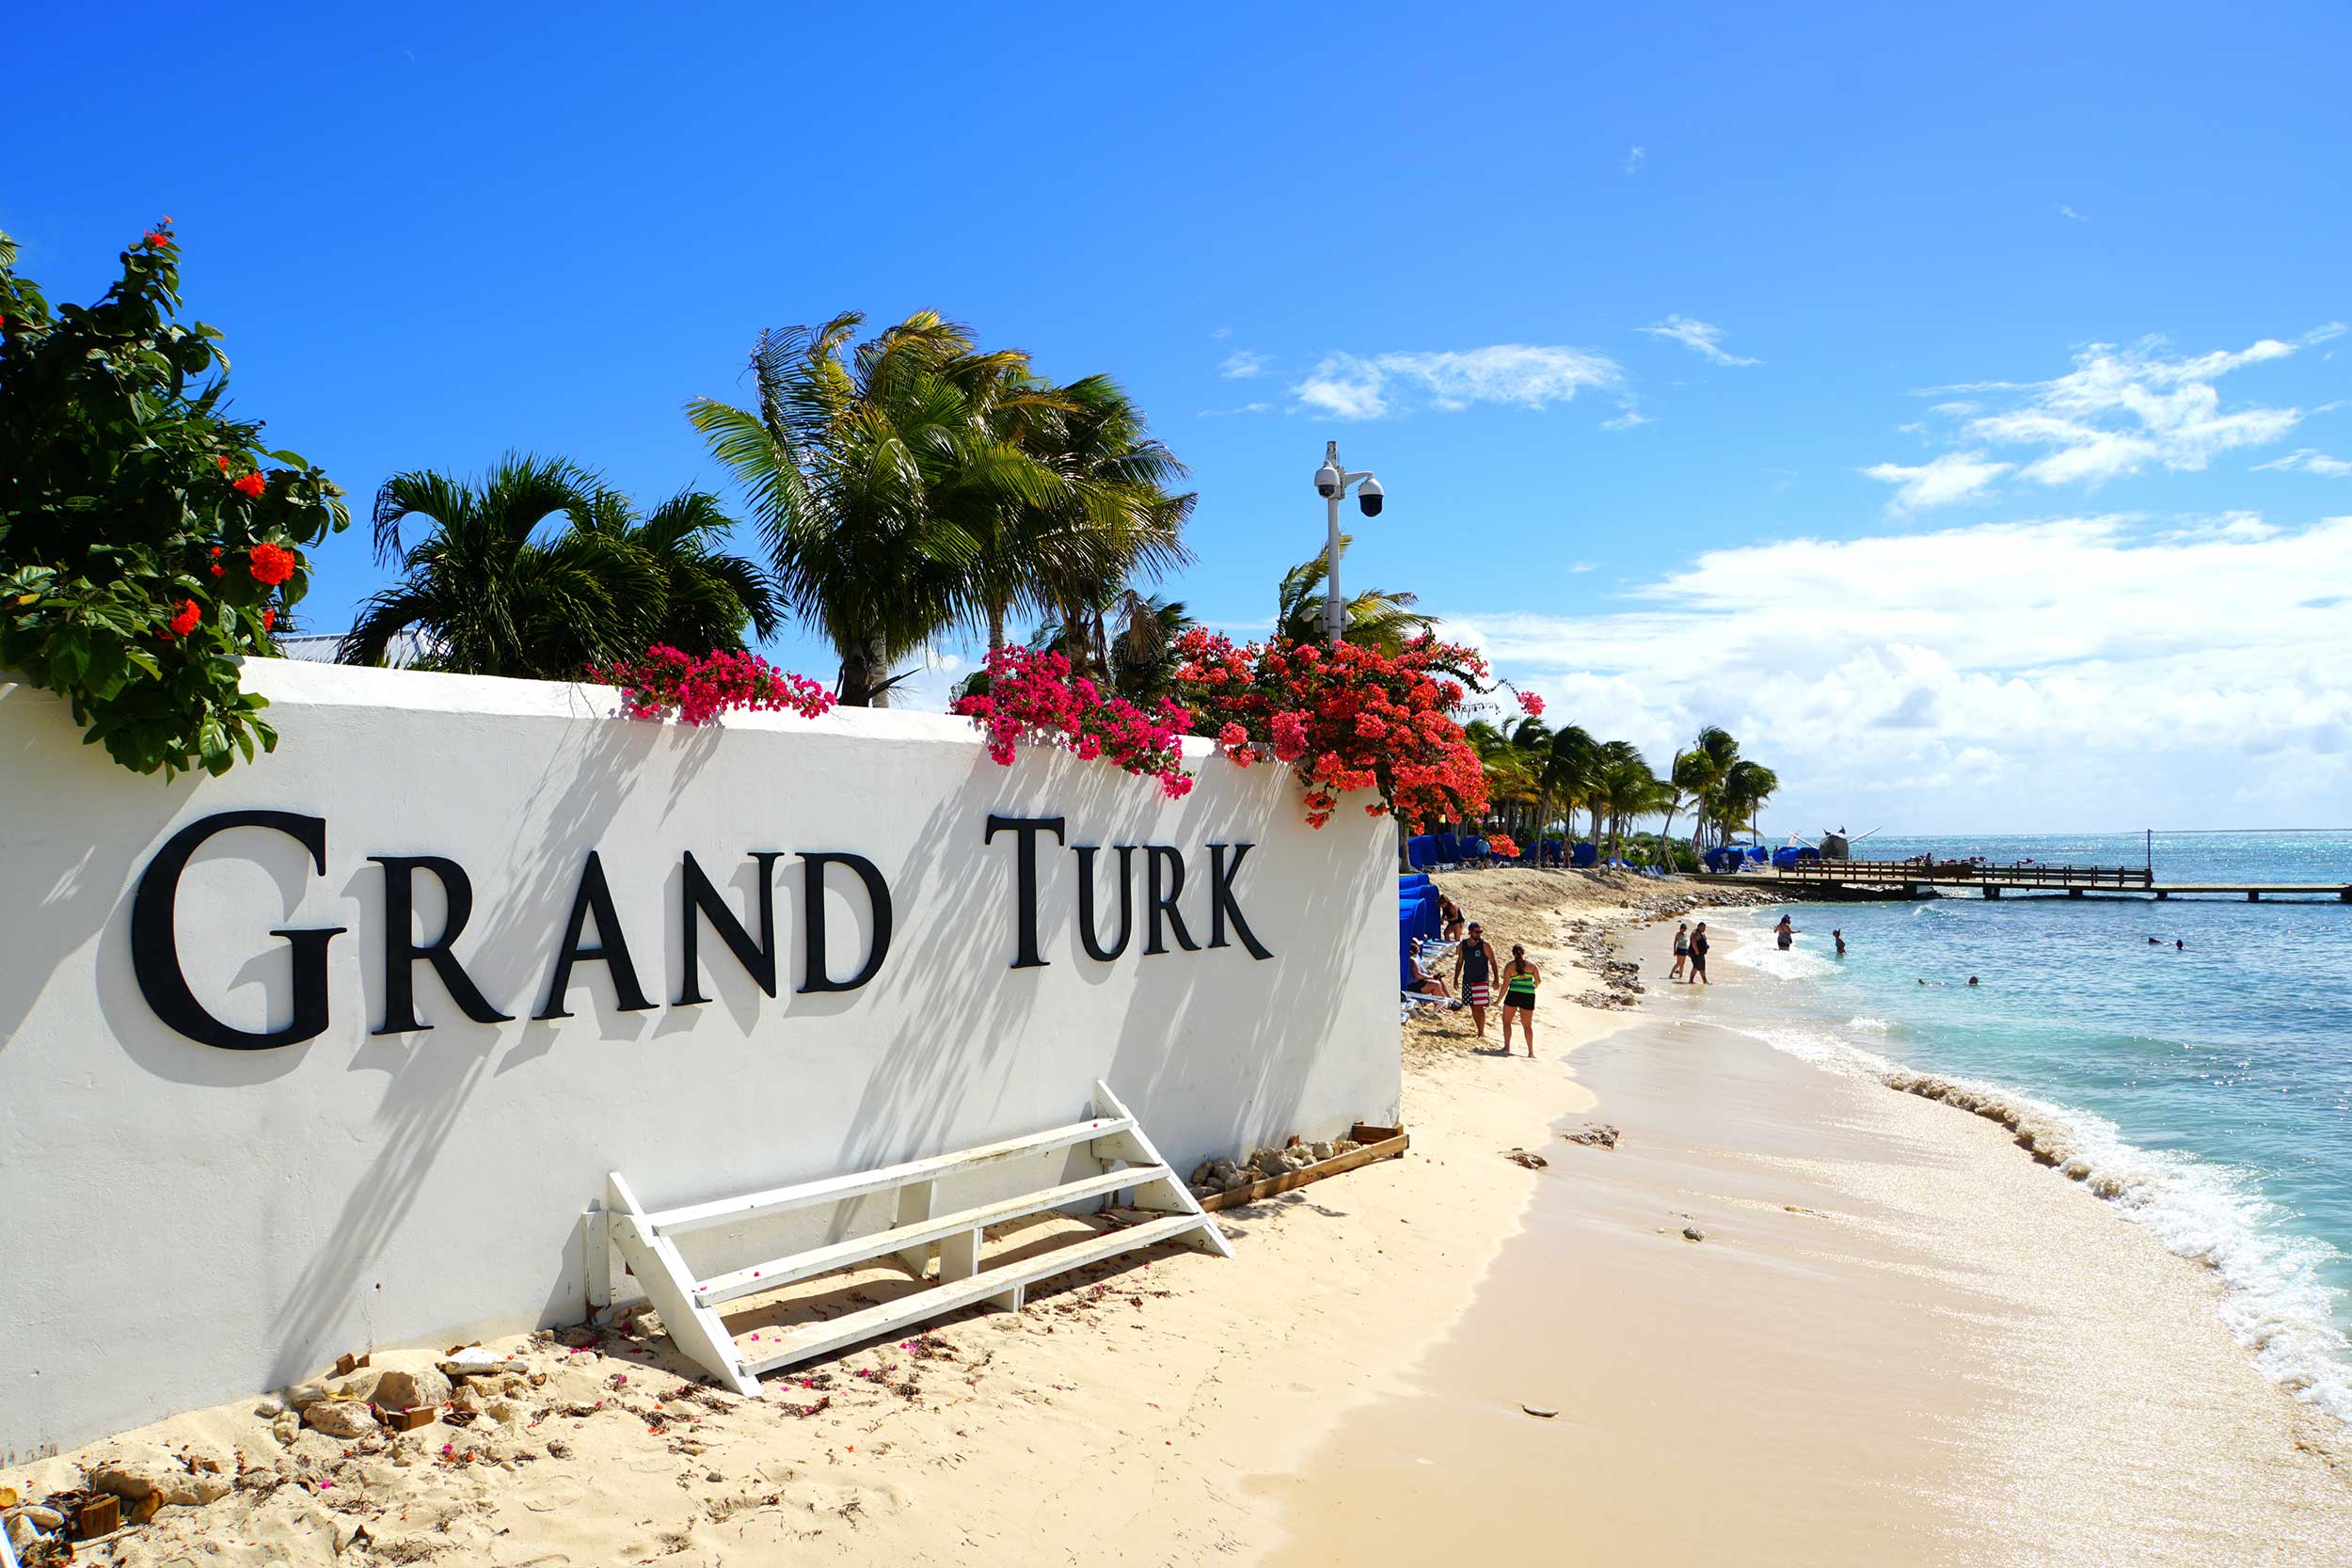 Large Grand Turk sign at Turks & Caicos cruise port entrance.